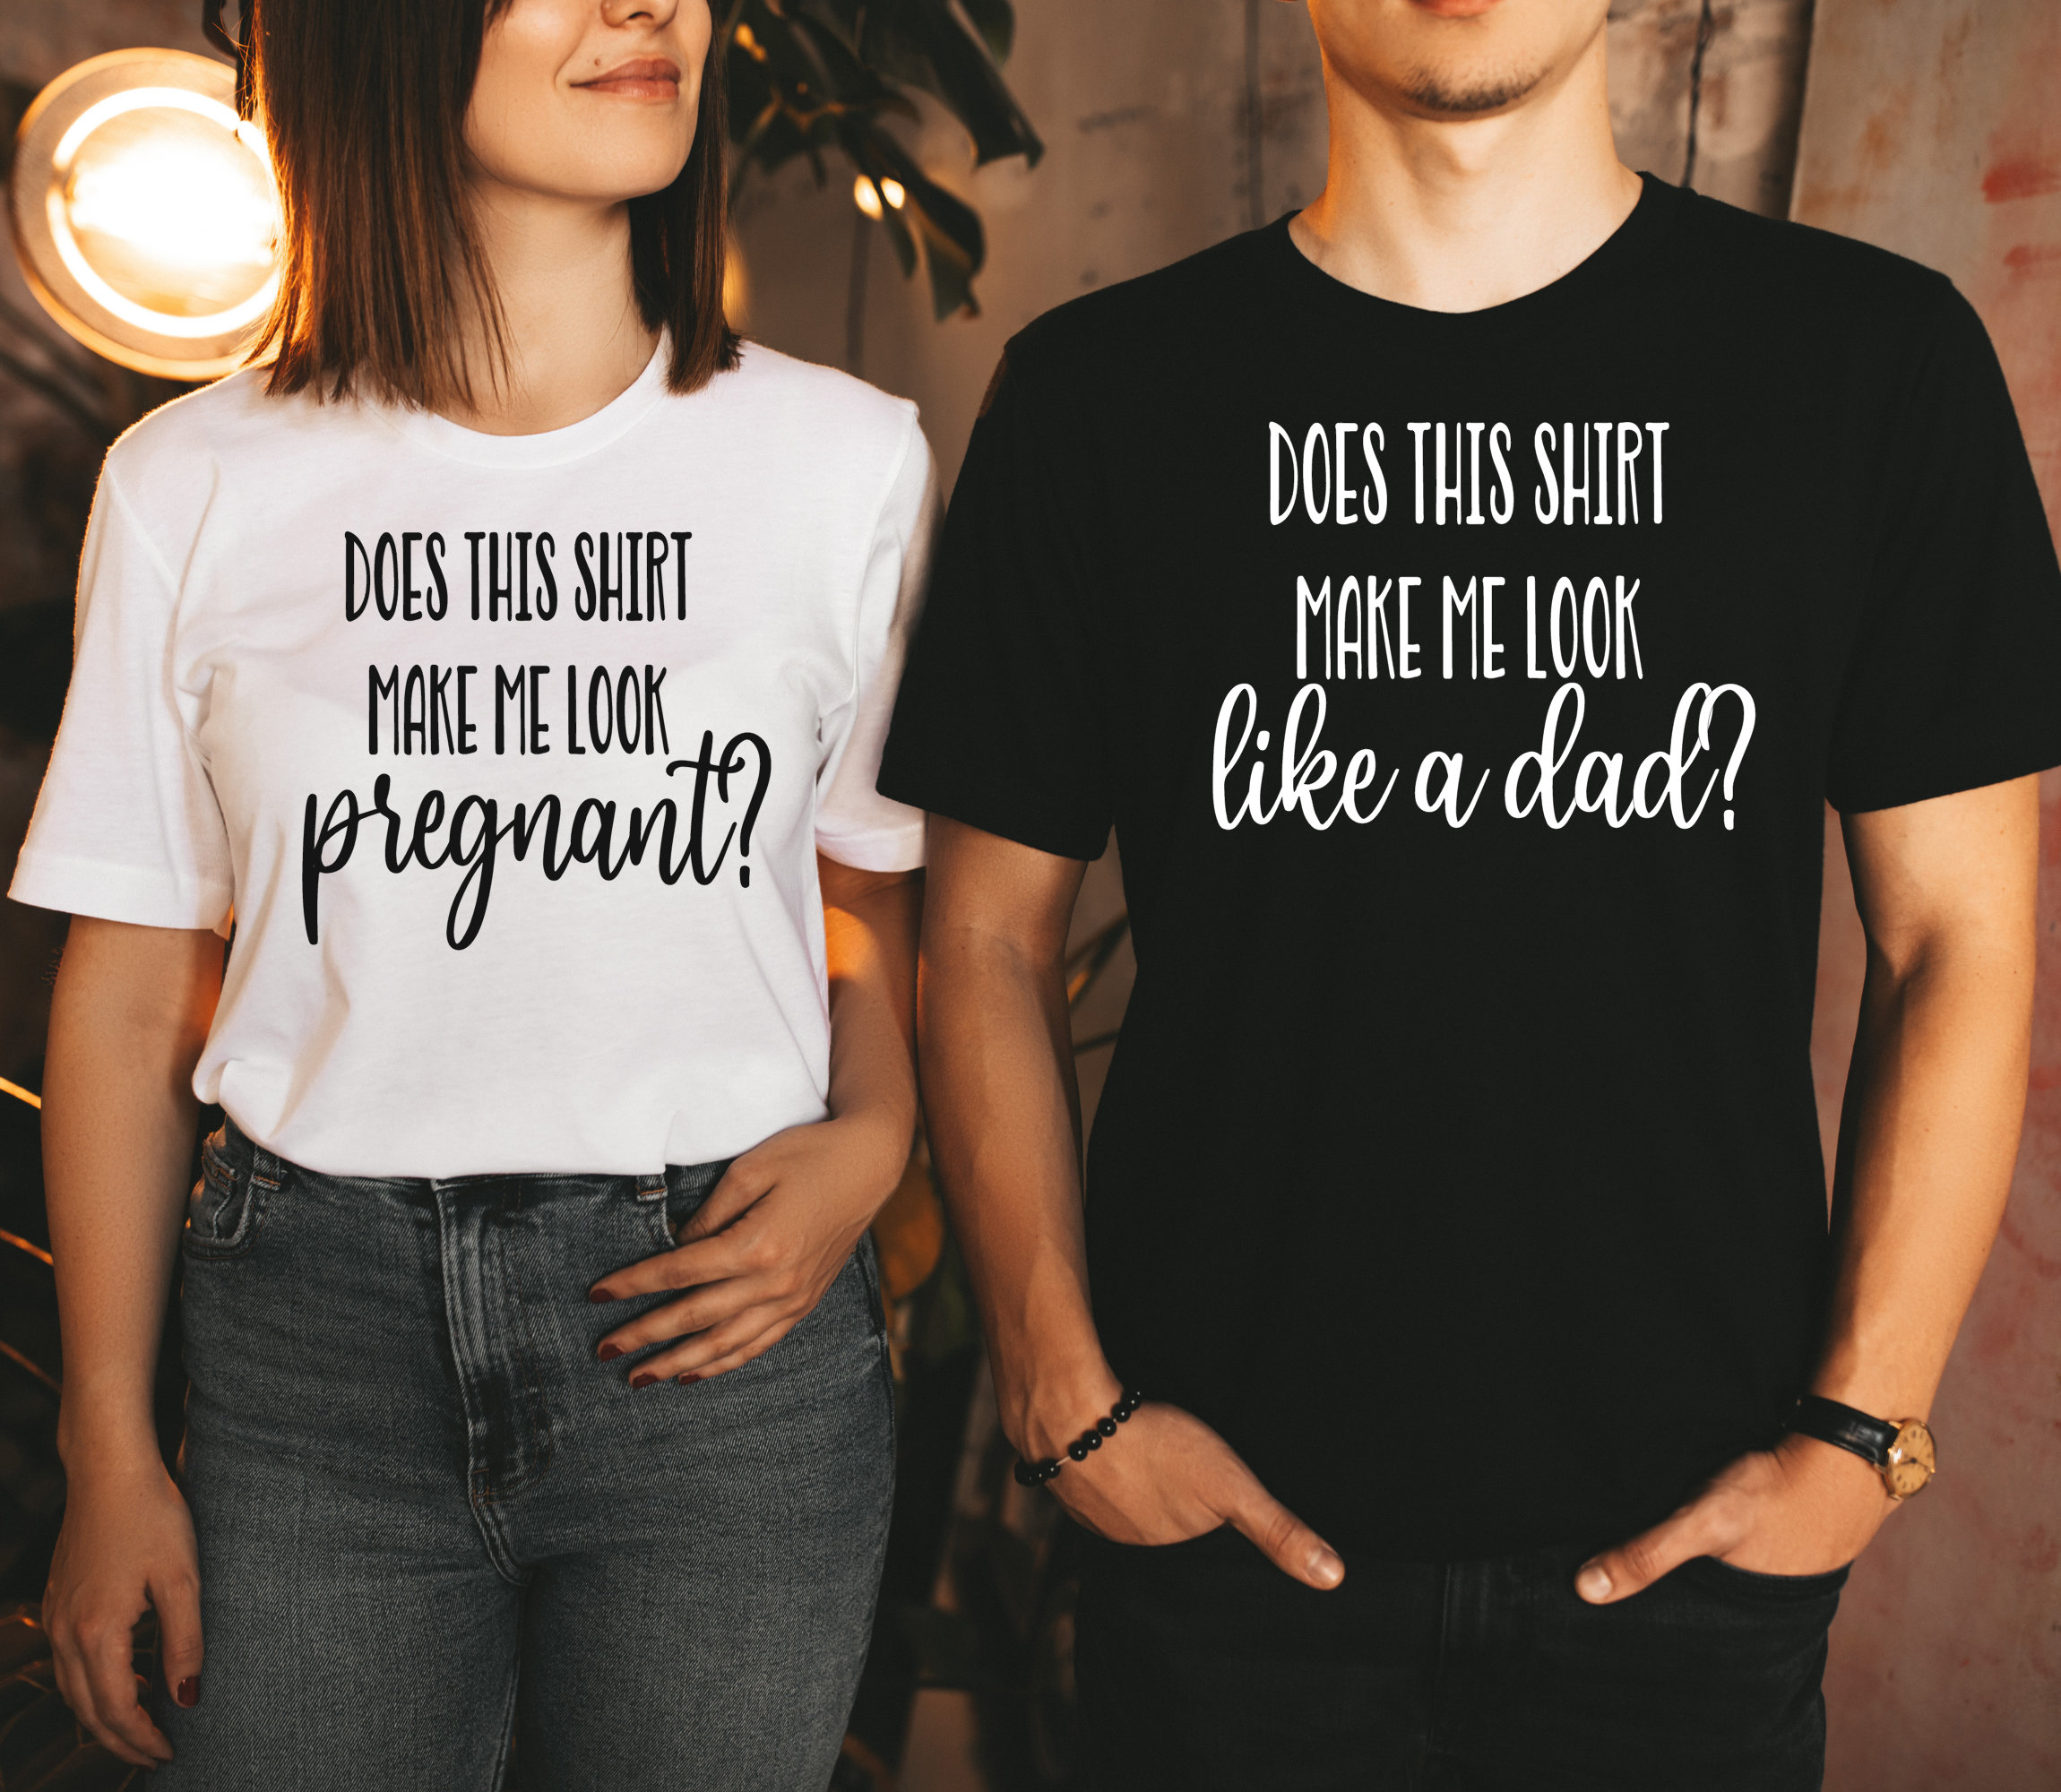 DarlingMagnolias Couples Pregnancy Announcement Shirts, Mom Dad Matching Shirts, Does This Shirt Make Me Look Pregnant, Baby Announcement, Baby Reveal